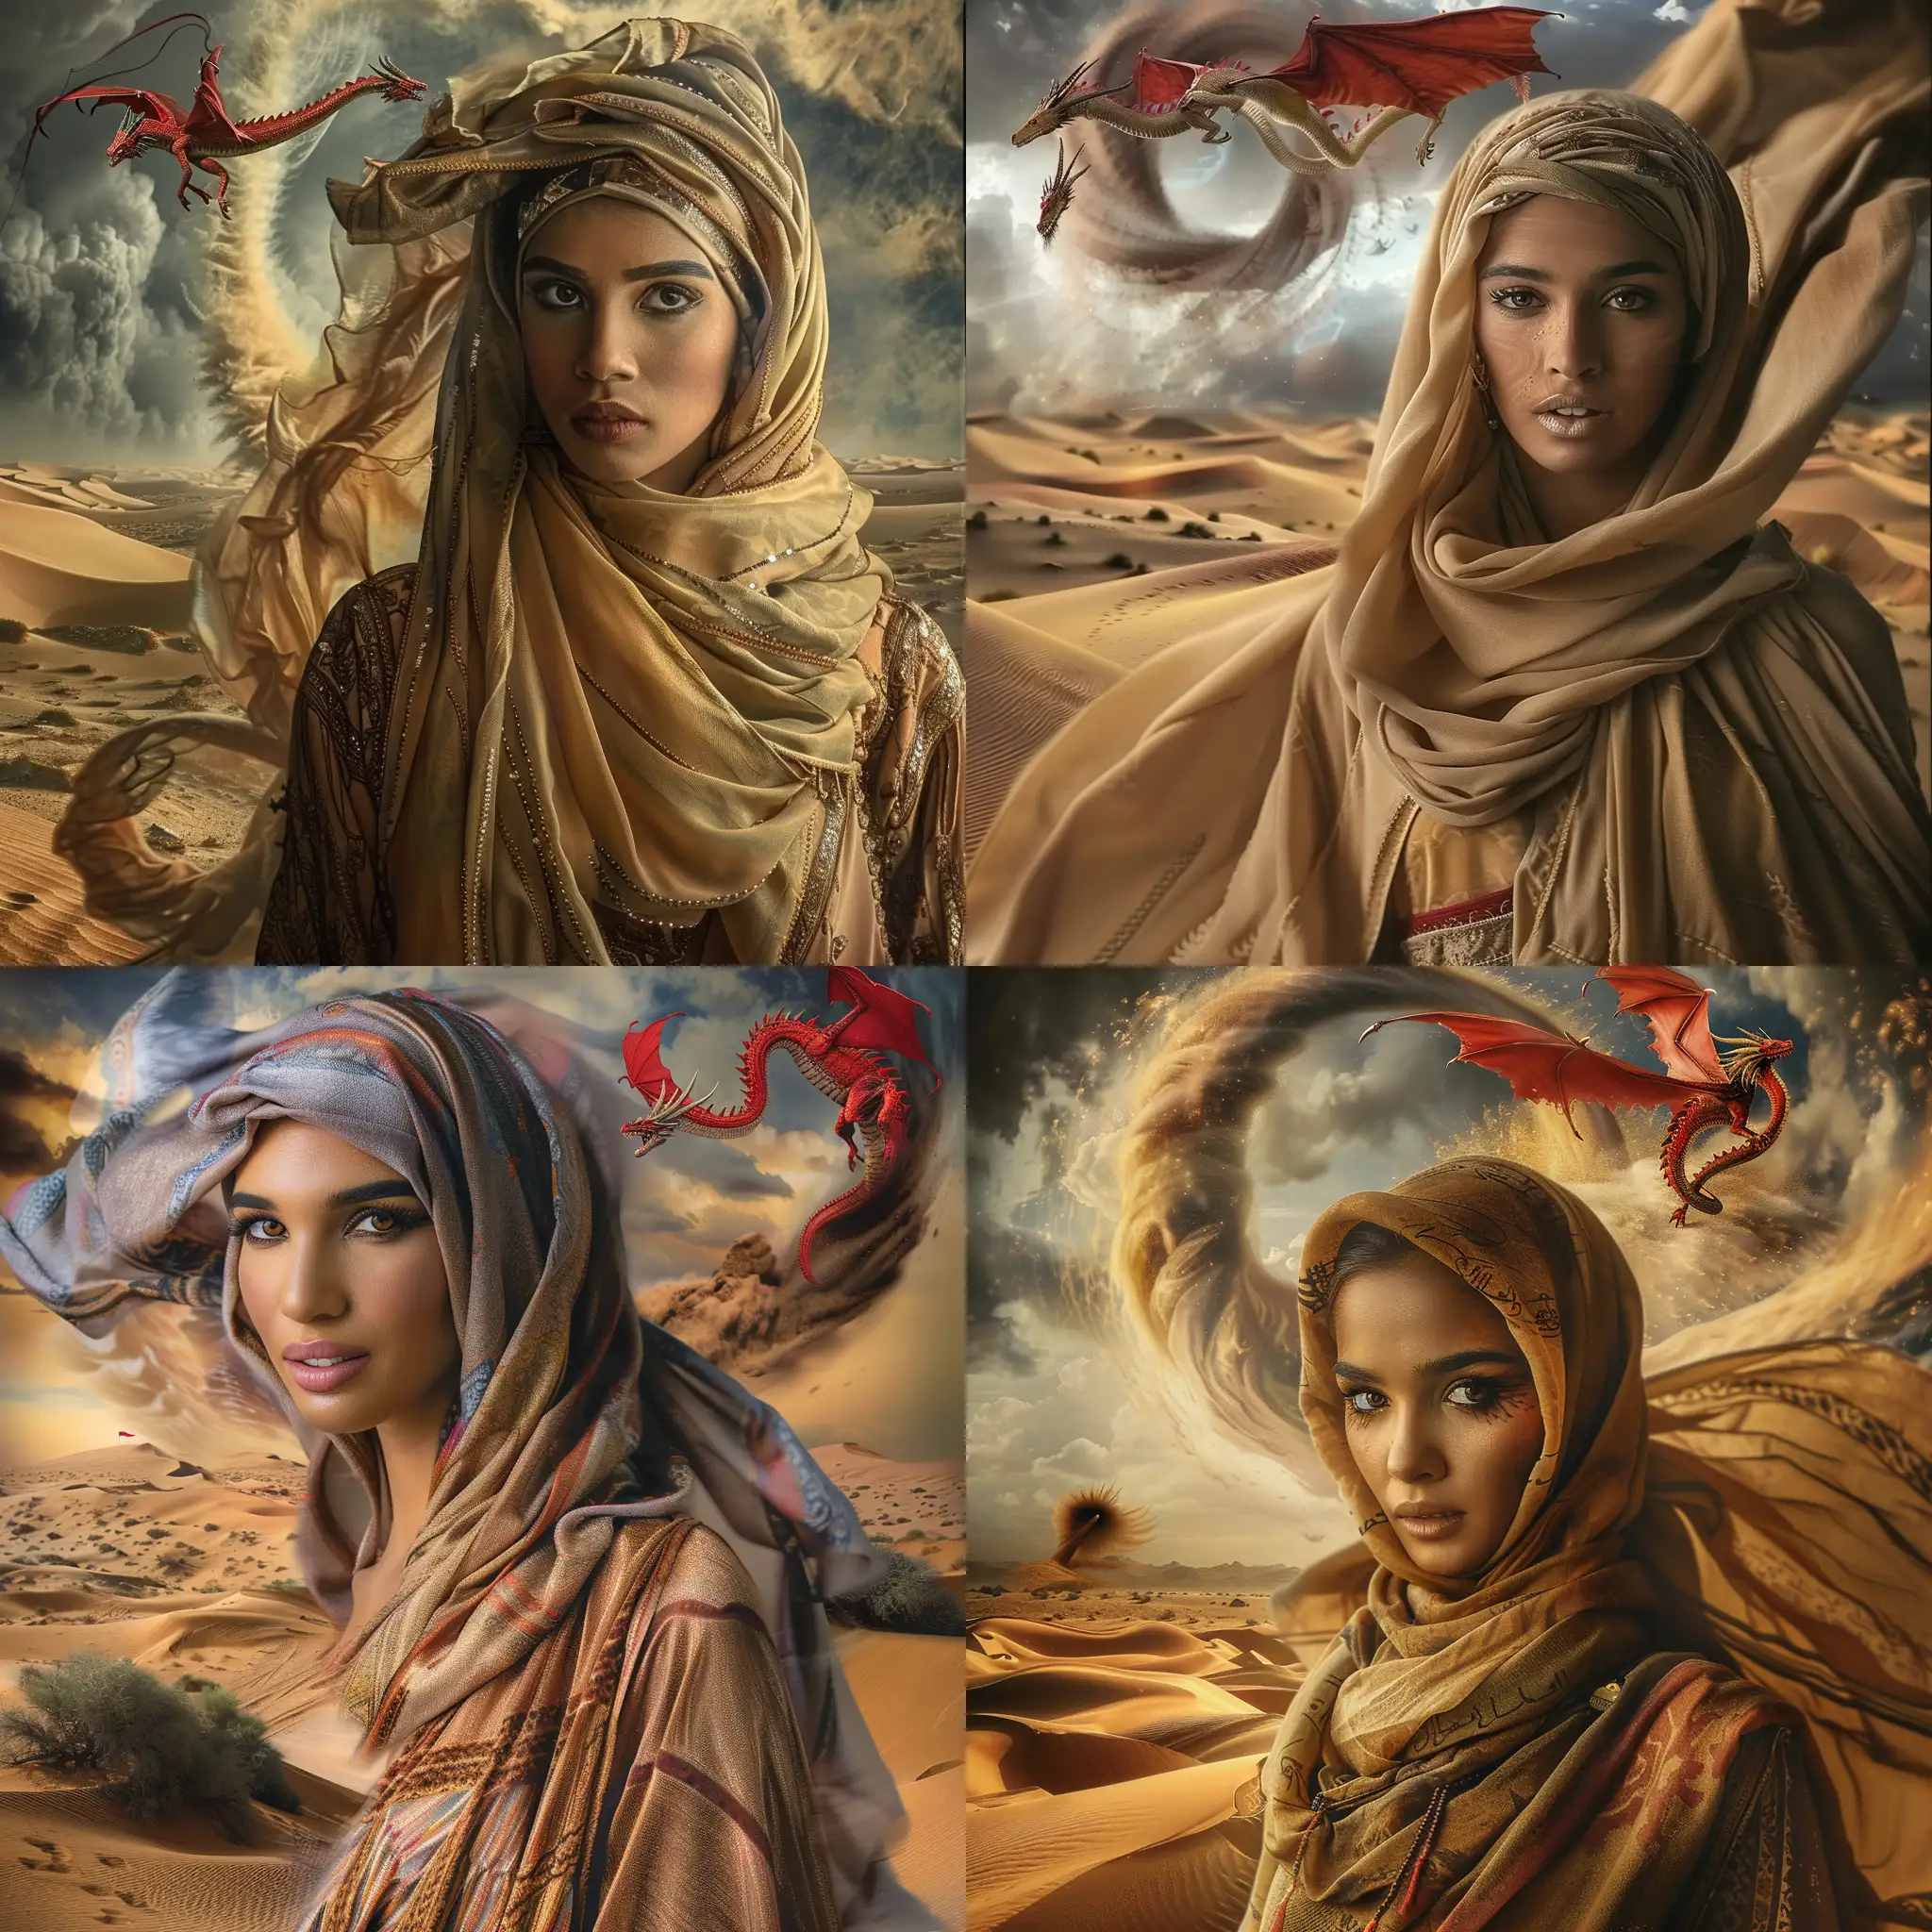 A highly detailed photographic  image a beautiful Arabian woman . Her head scarf and robes are blowing in the wind.  Behind her is the  desert. A tornado is blowing  the sand up into the  air. A red dragon is flying above. Beautiful magical mysterious fantasy surreal highly detailed